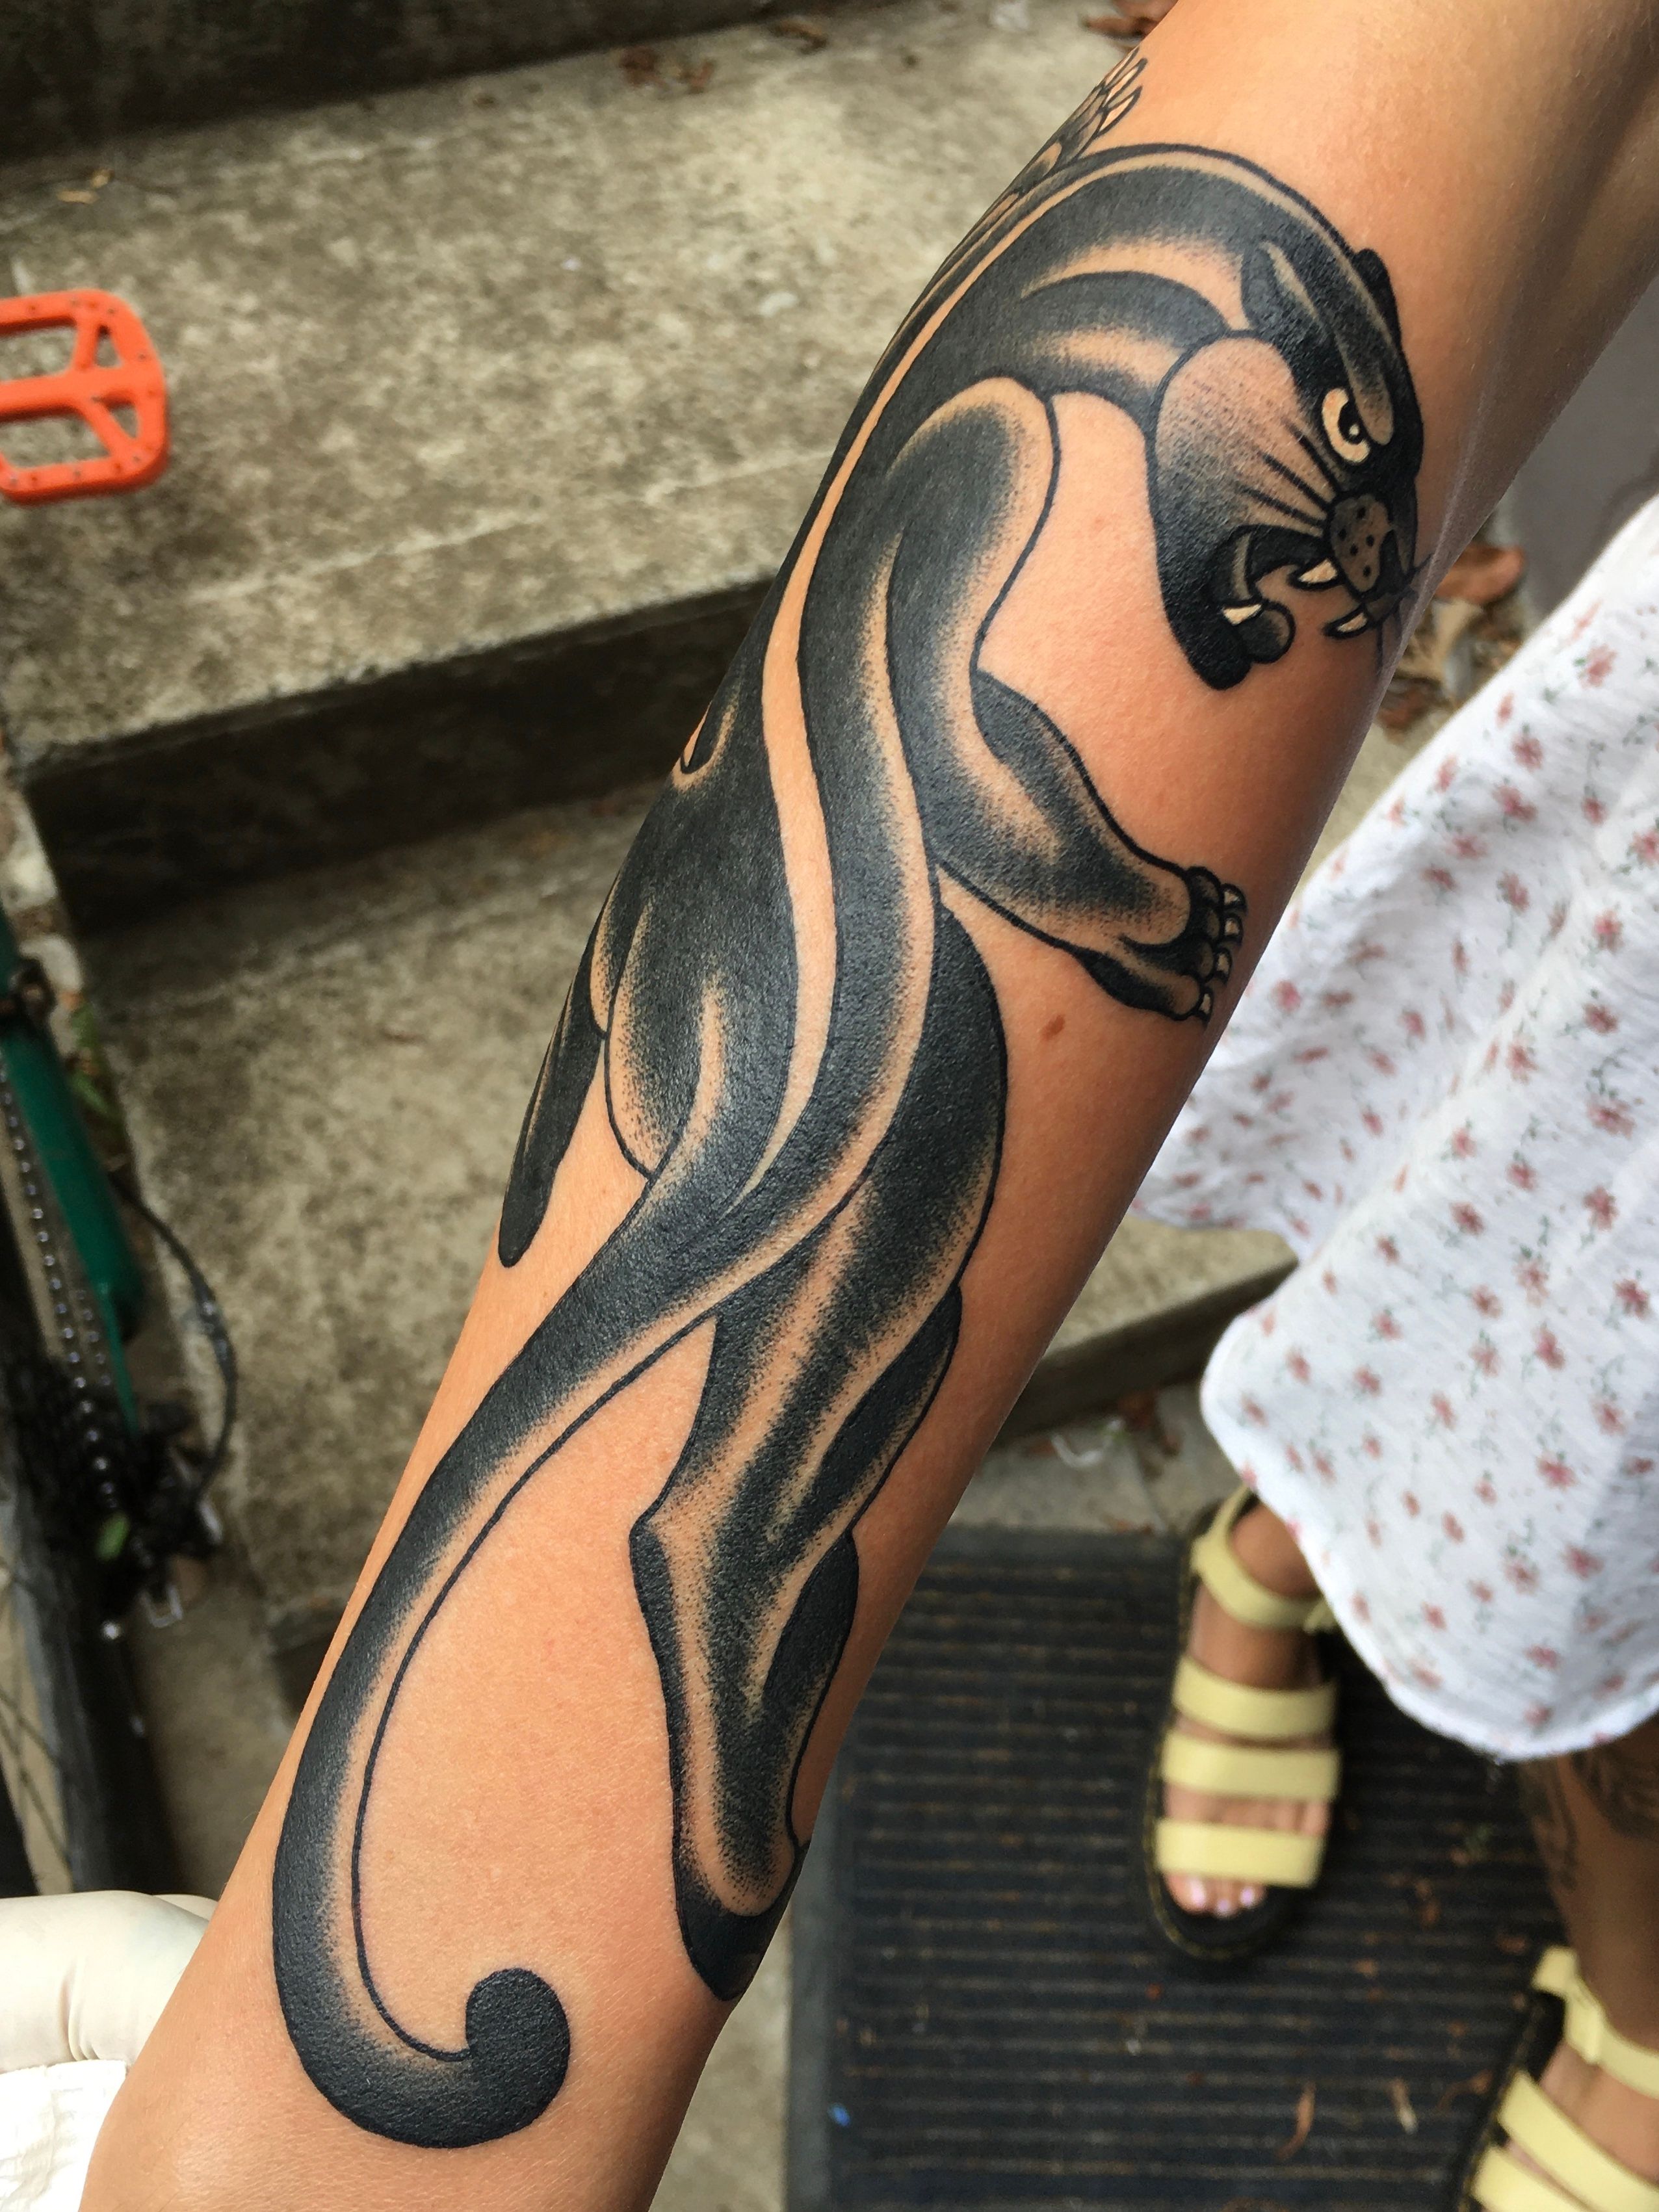 Galactic panther tattoo on the left inner forearm.